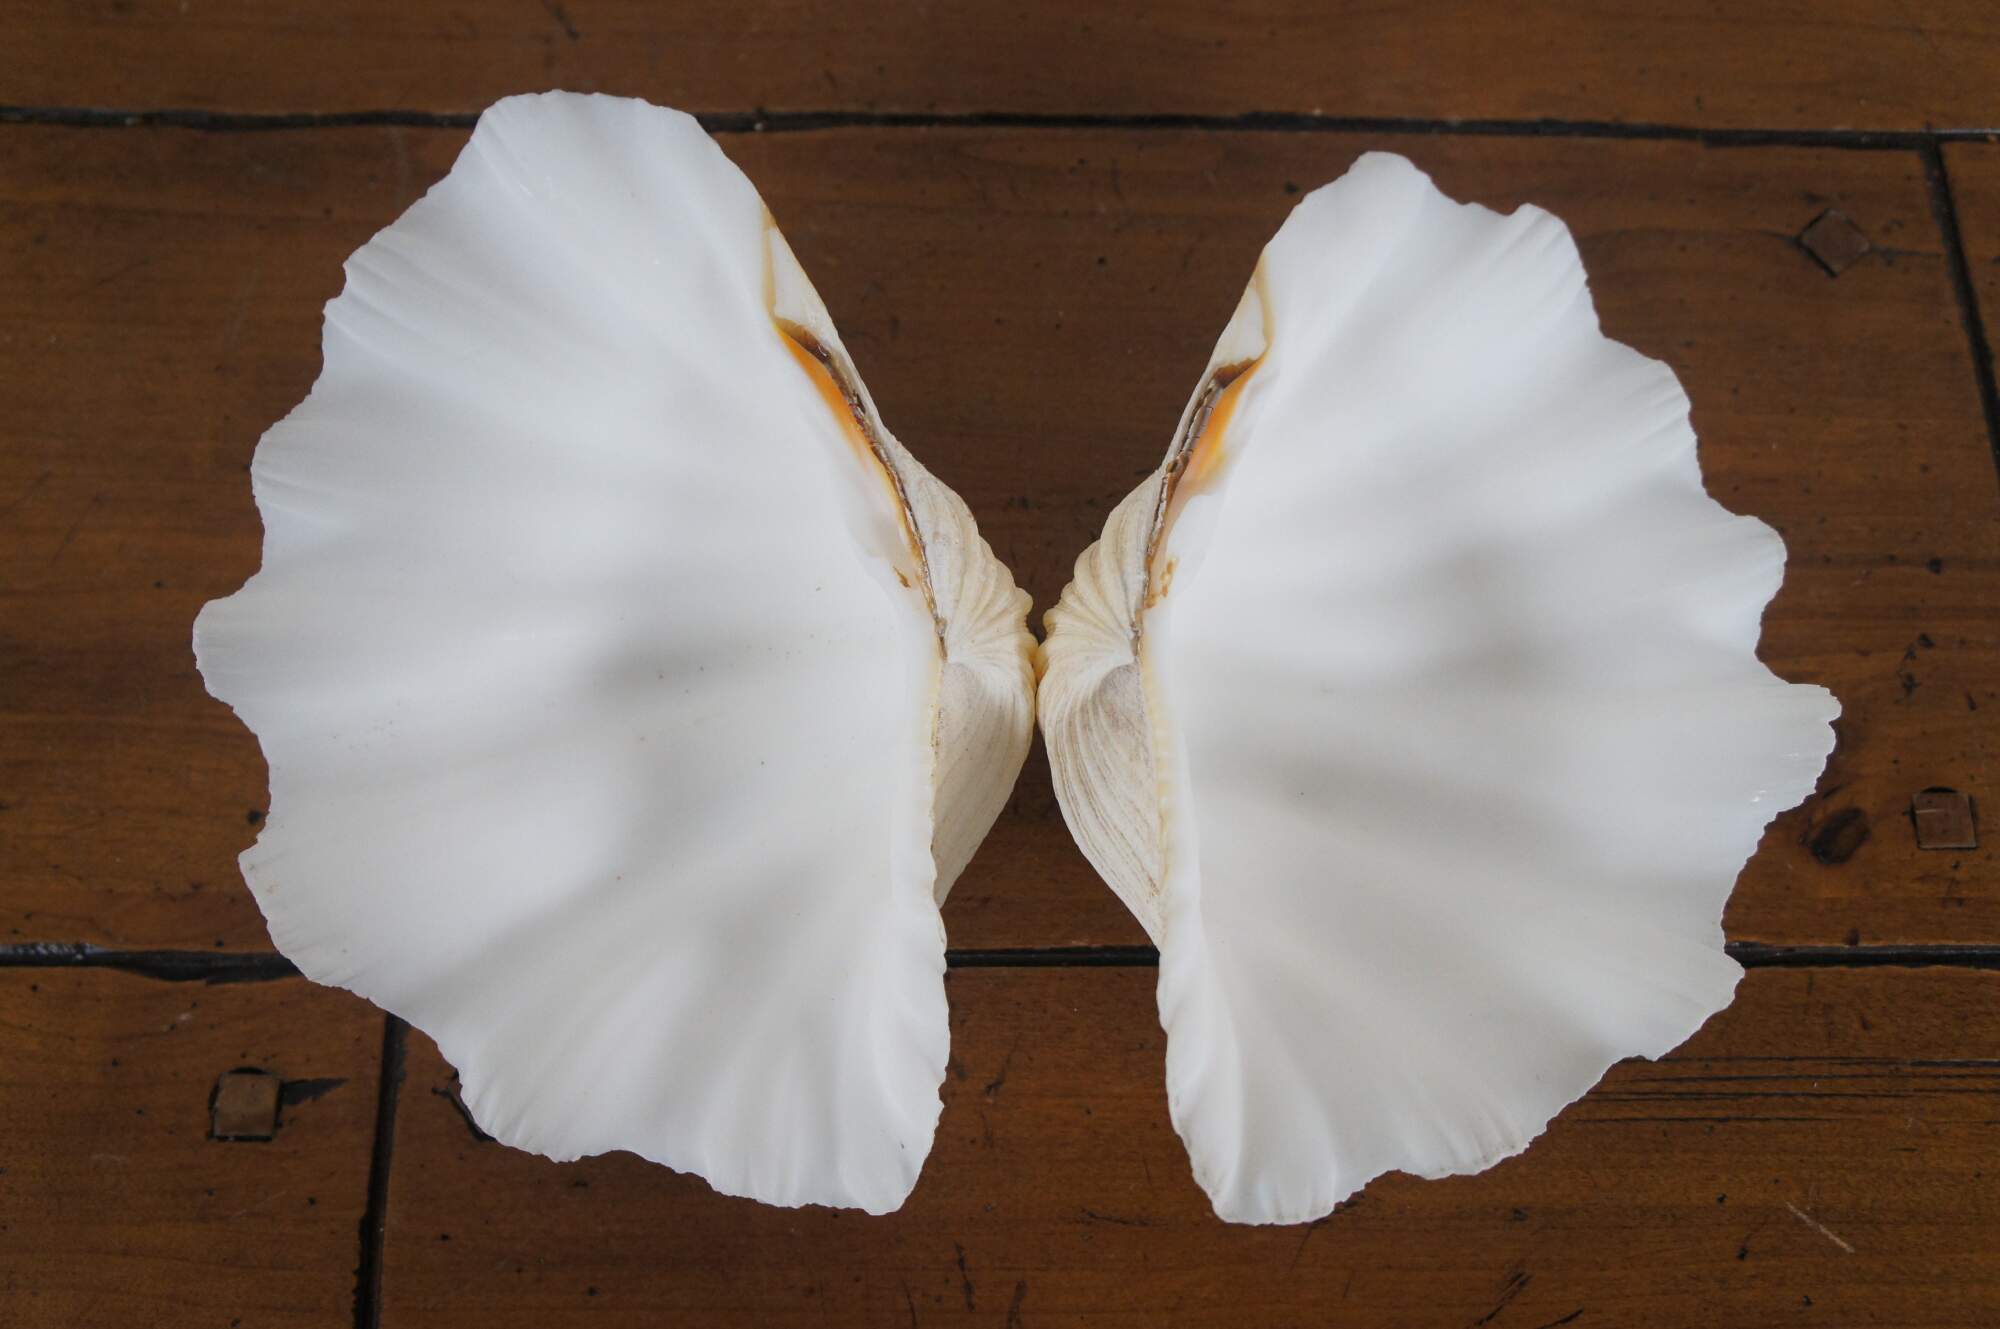 Natural Matching Pair Whole Complete Giant Clam Sea Shell Tridacna